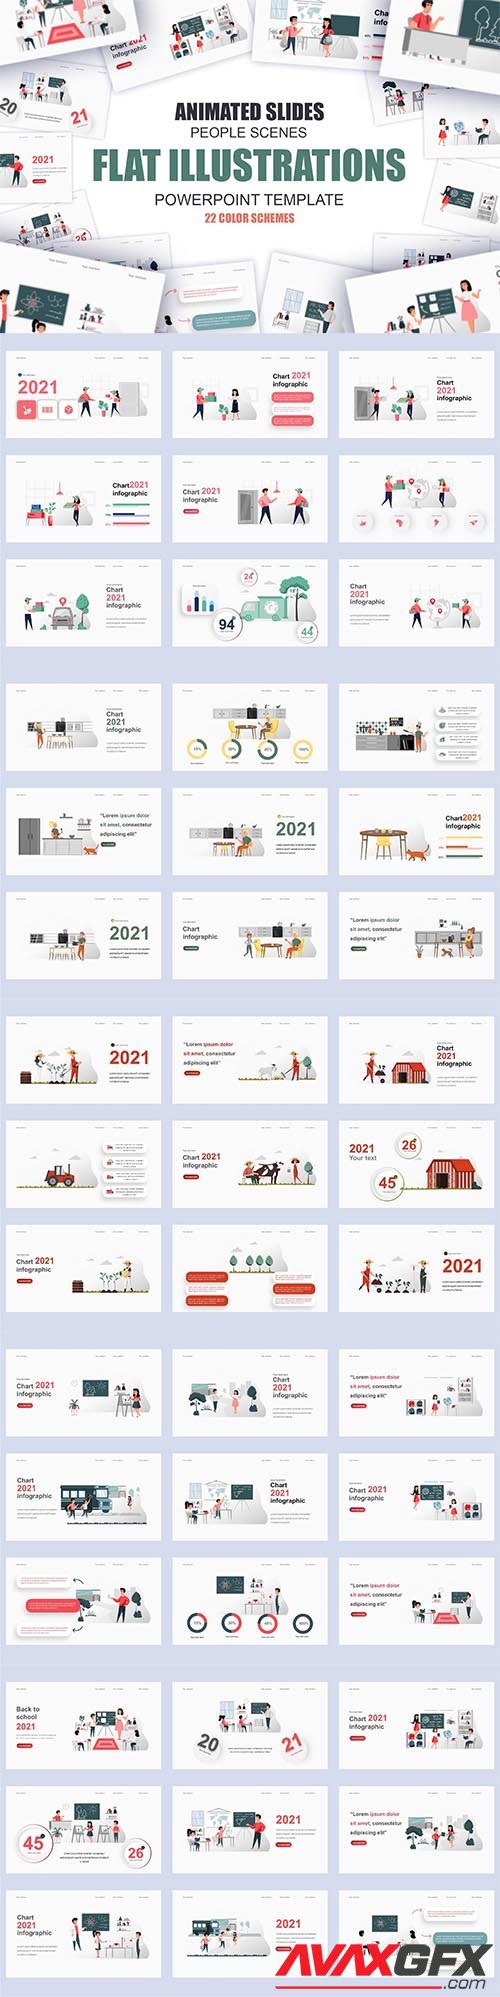 Back to School Illustration Powerpoint Template